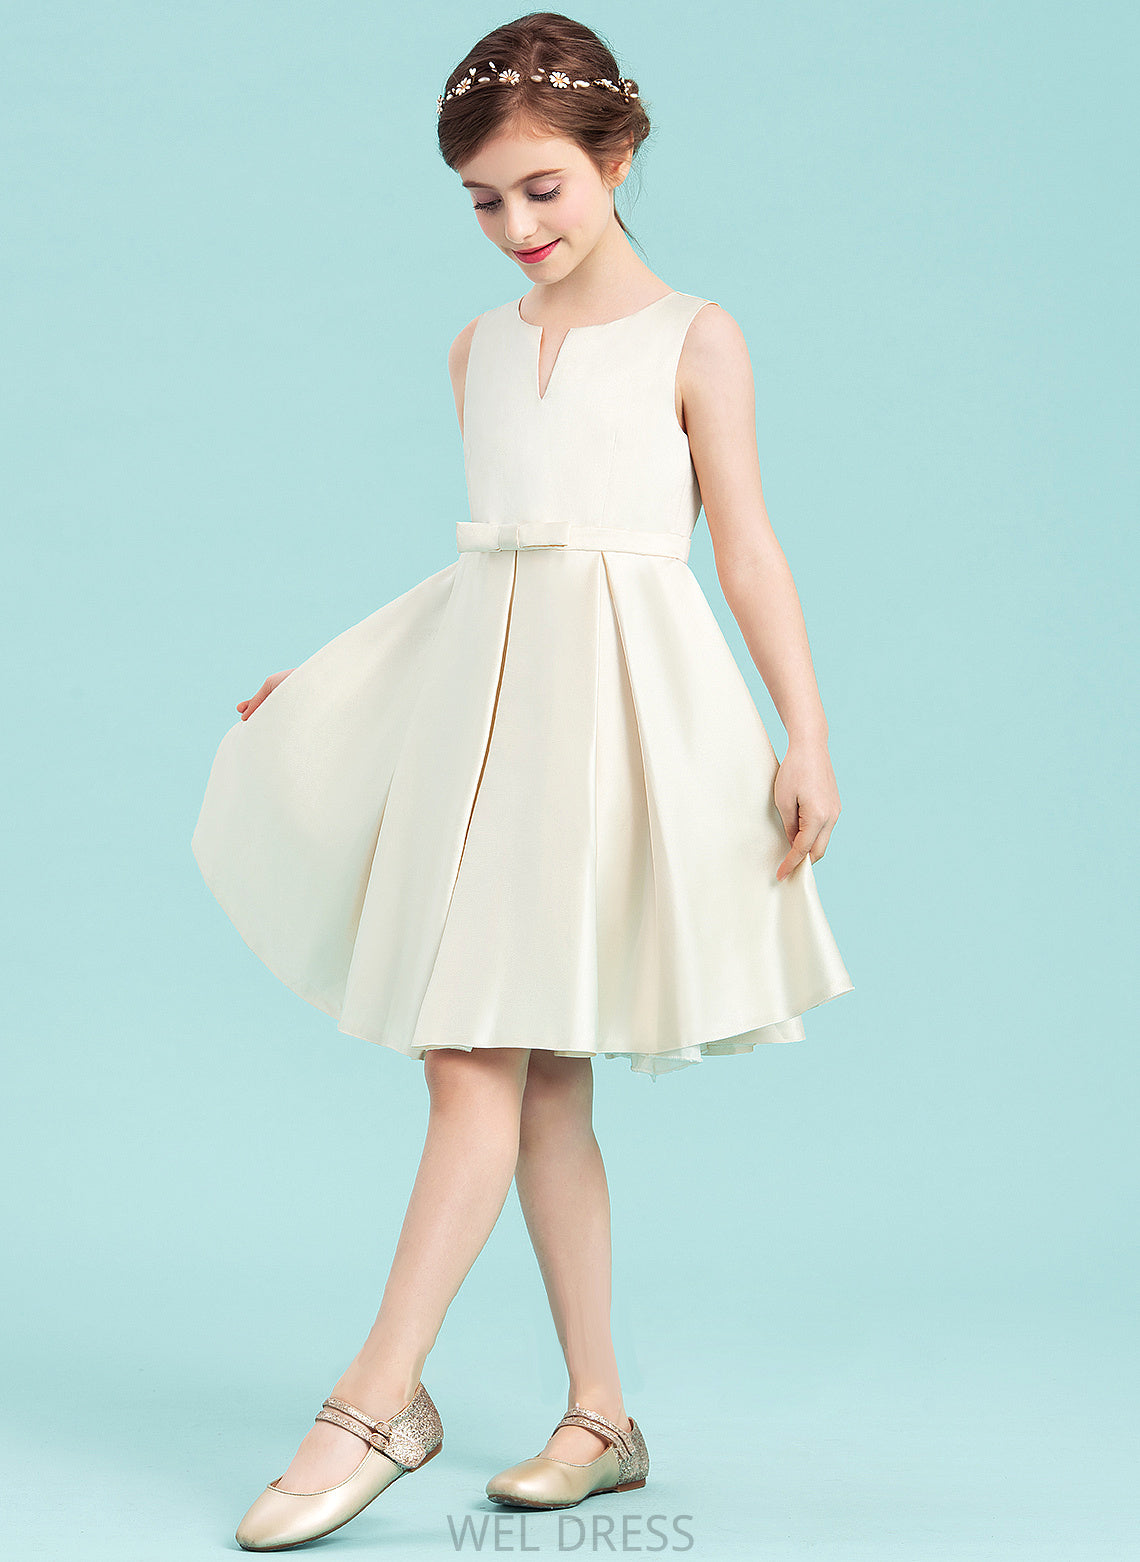 Junior Bridesmaid Dresses With Neck A-Line Yaritza Knee-Length Scoop Satin Bow(s)